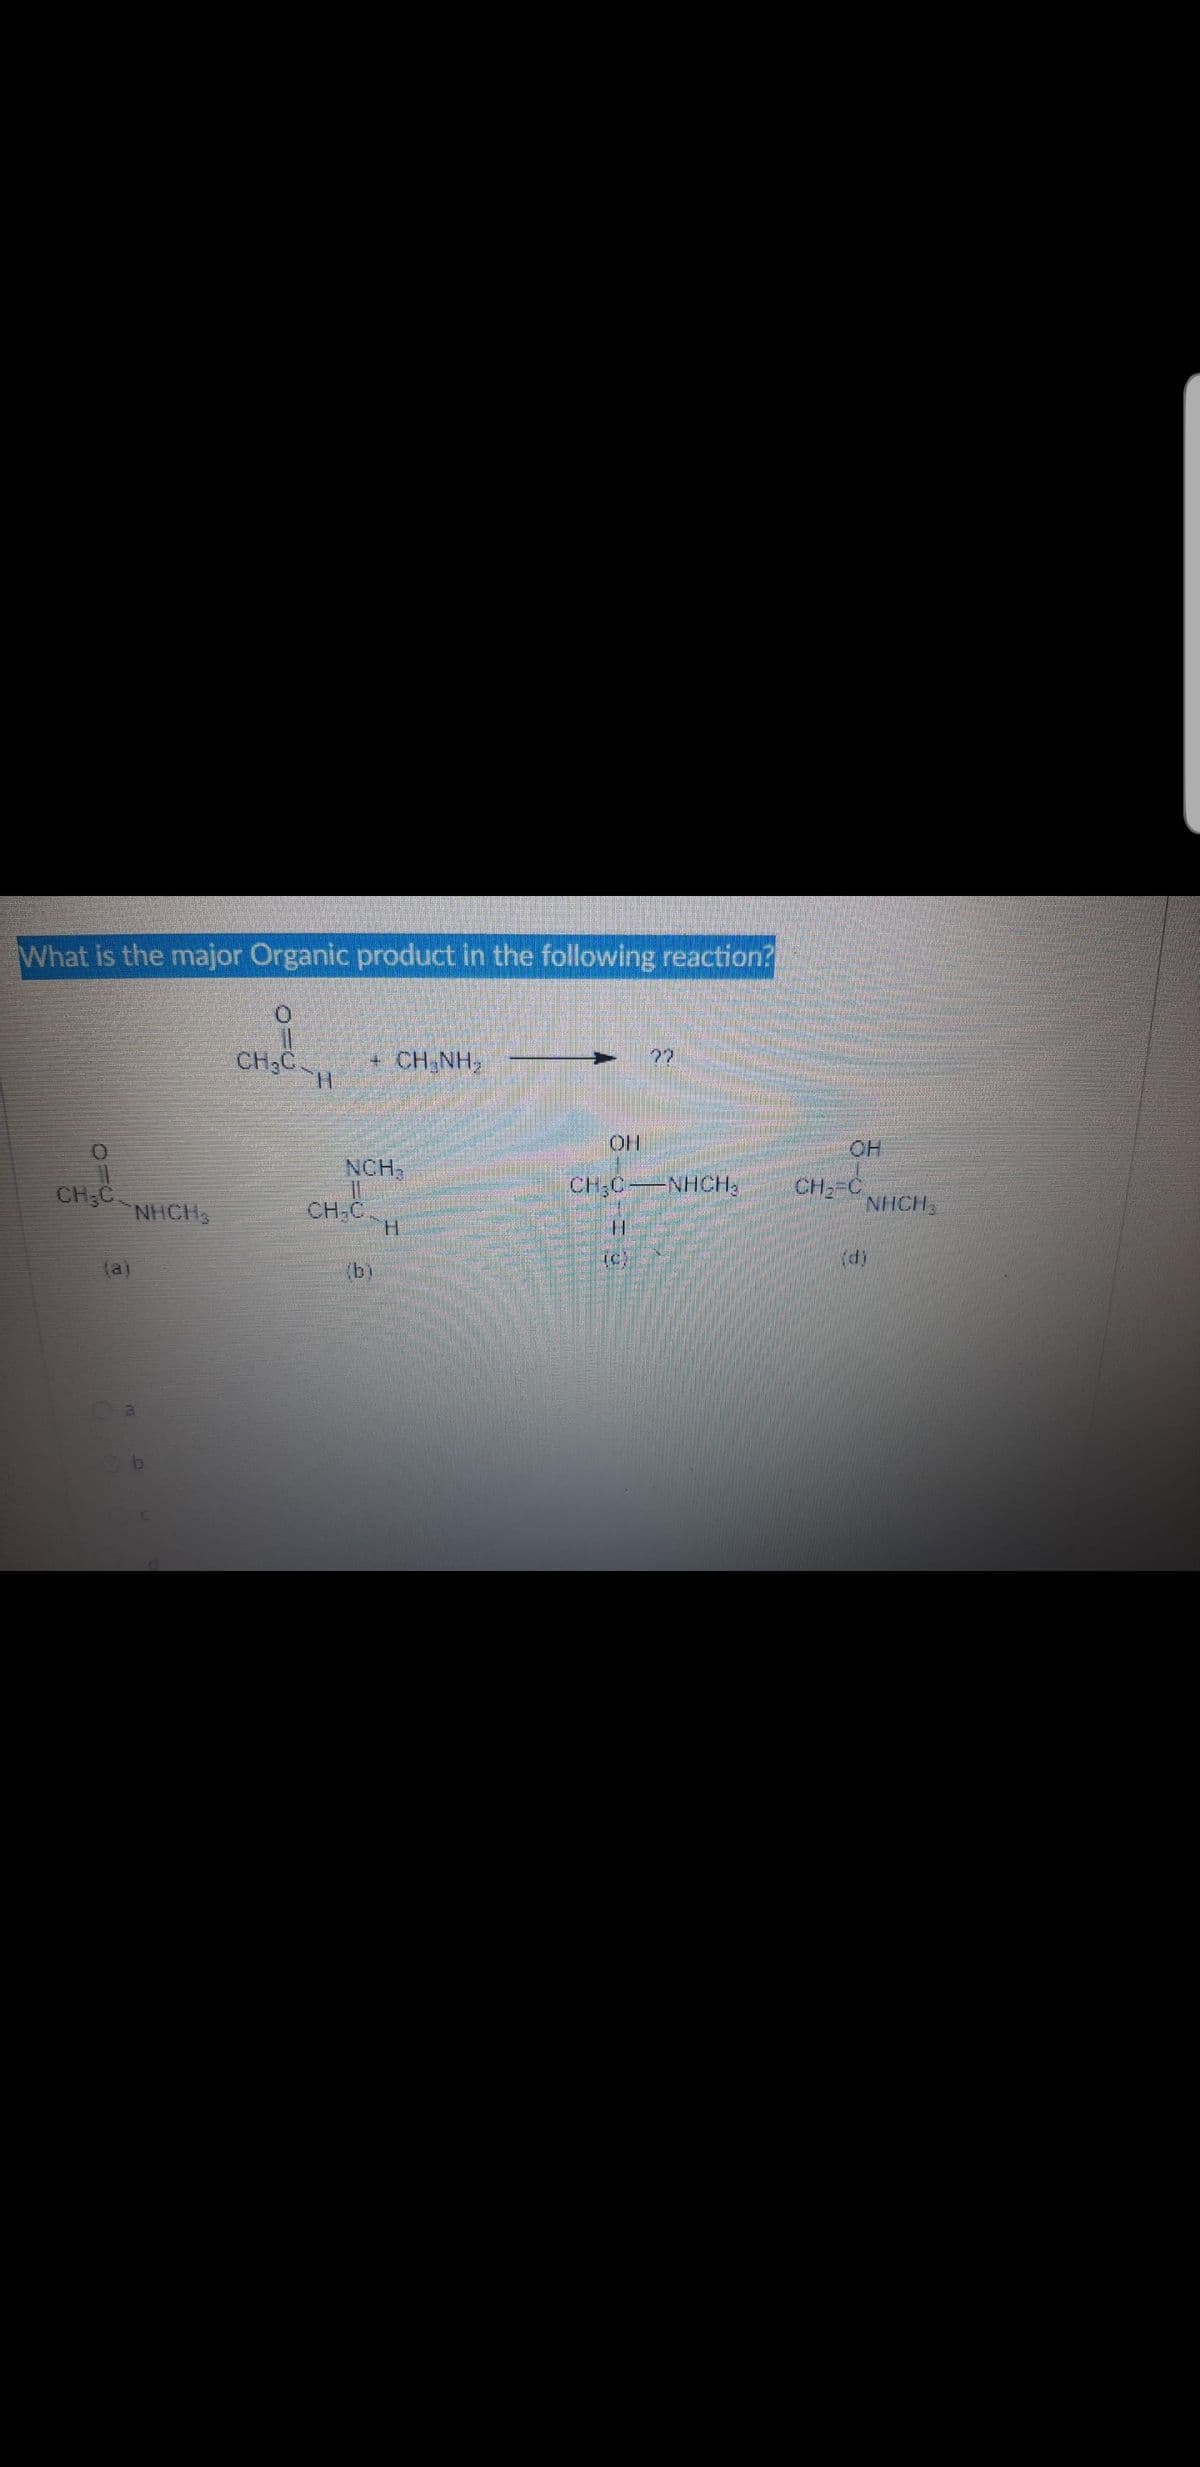 What is the major Organic product in the following reaction?
CH;C.
+ CH NH,
OH
NCH,
CH;C
NHCH
CH;CNHCH3
CH2-C
NHCH
CH,C.
H.
(c)
(a)
(b)
